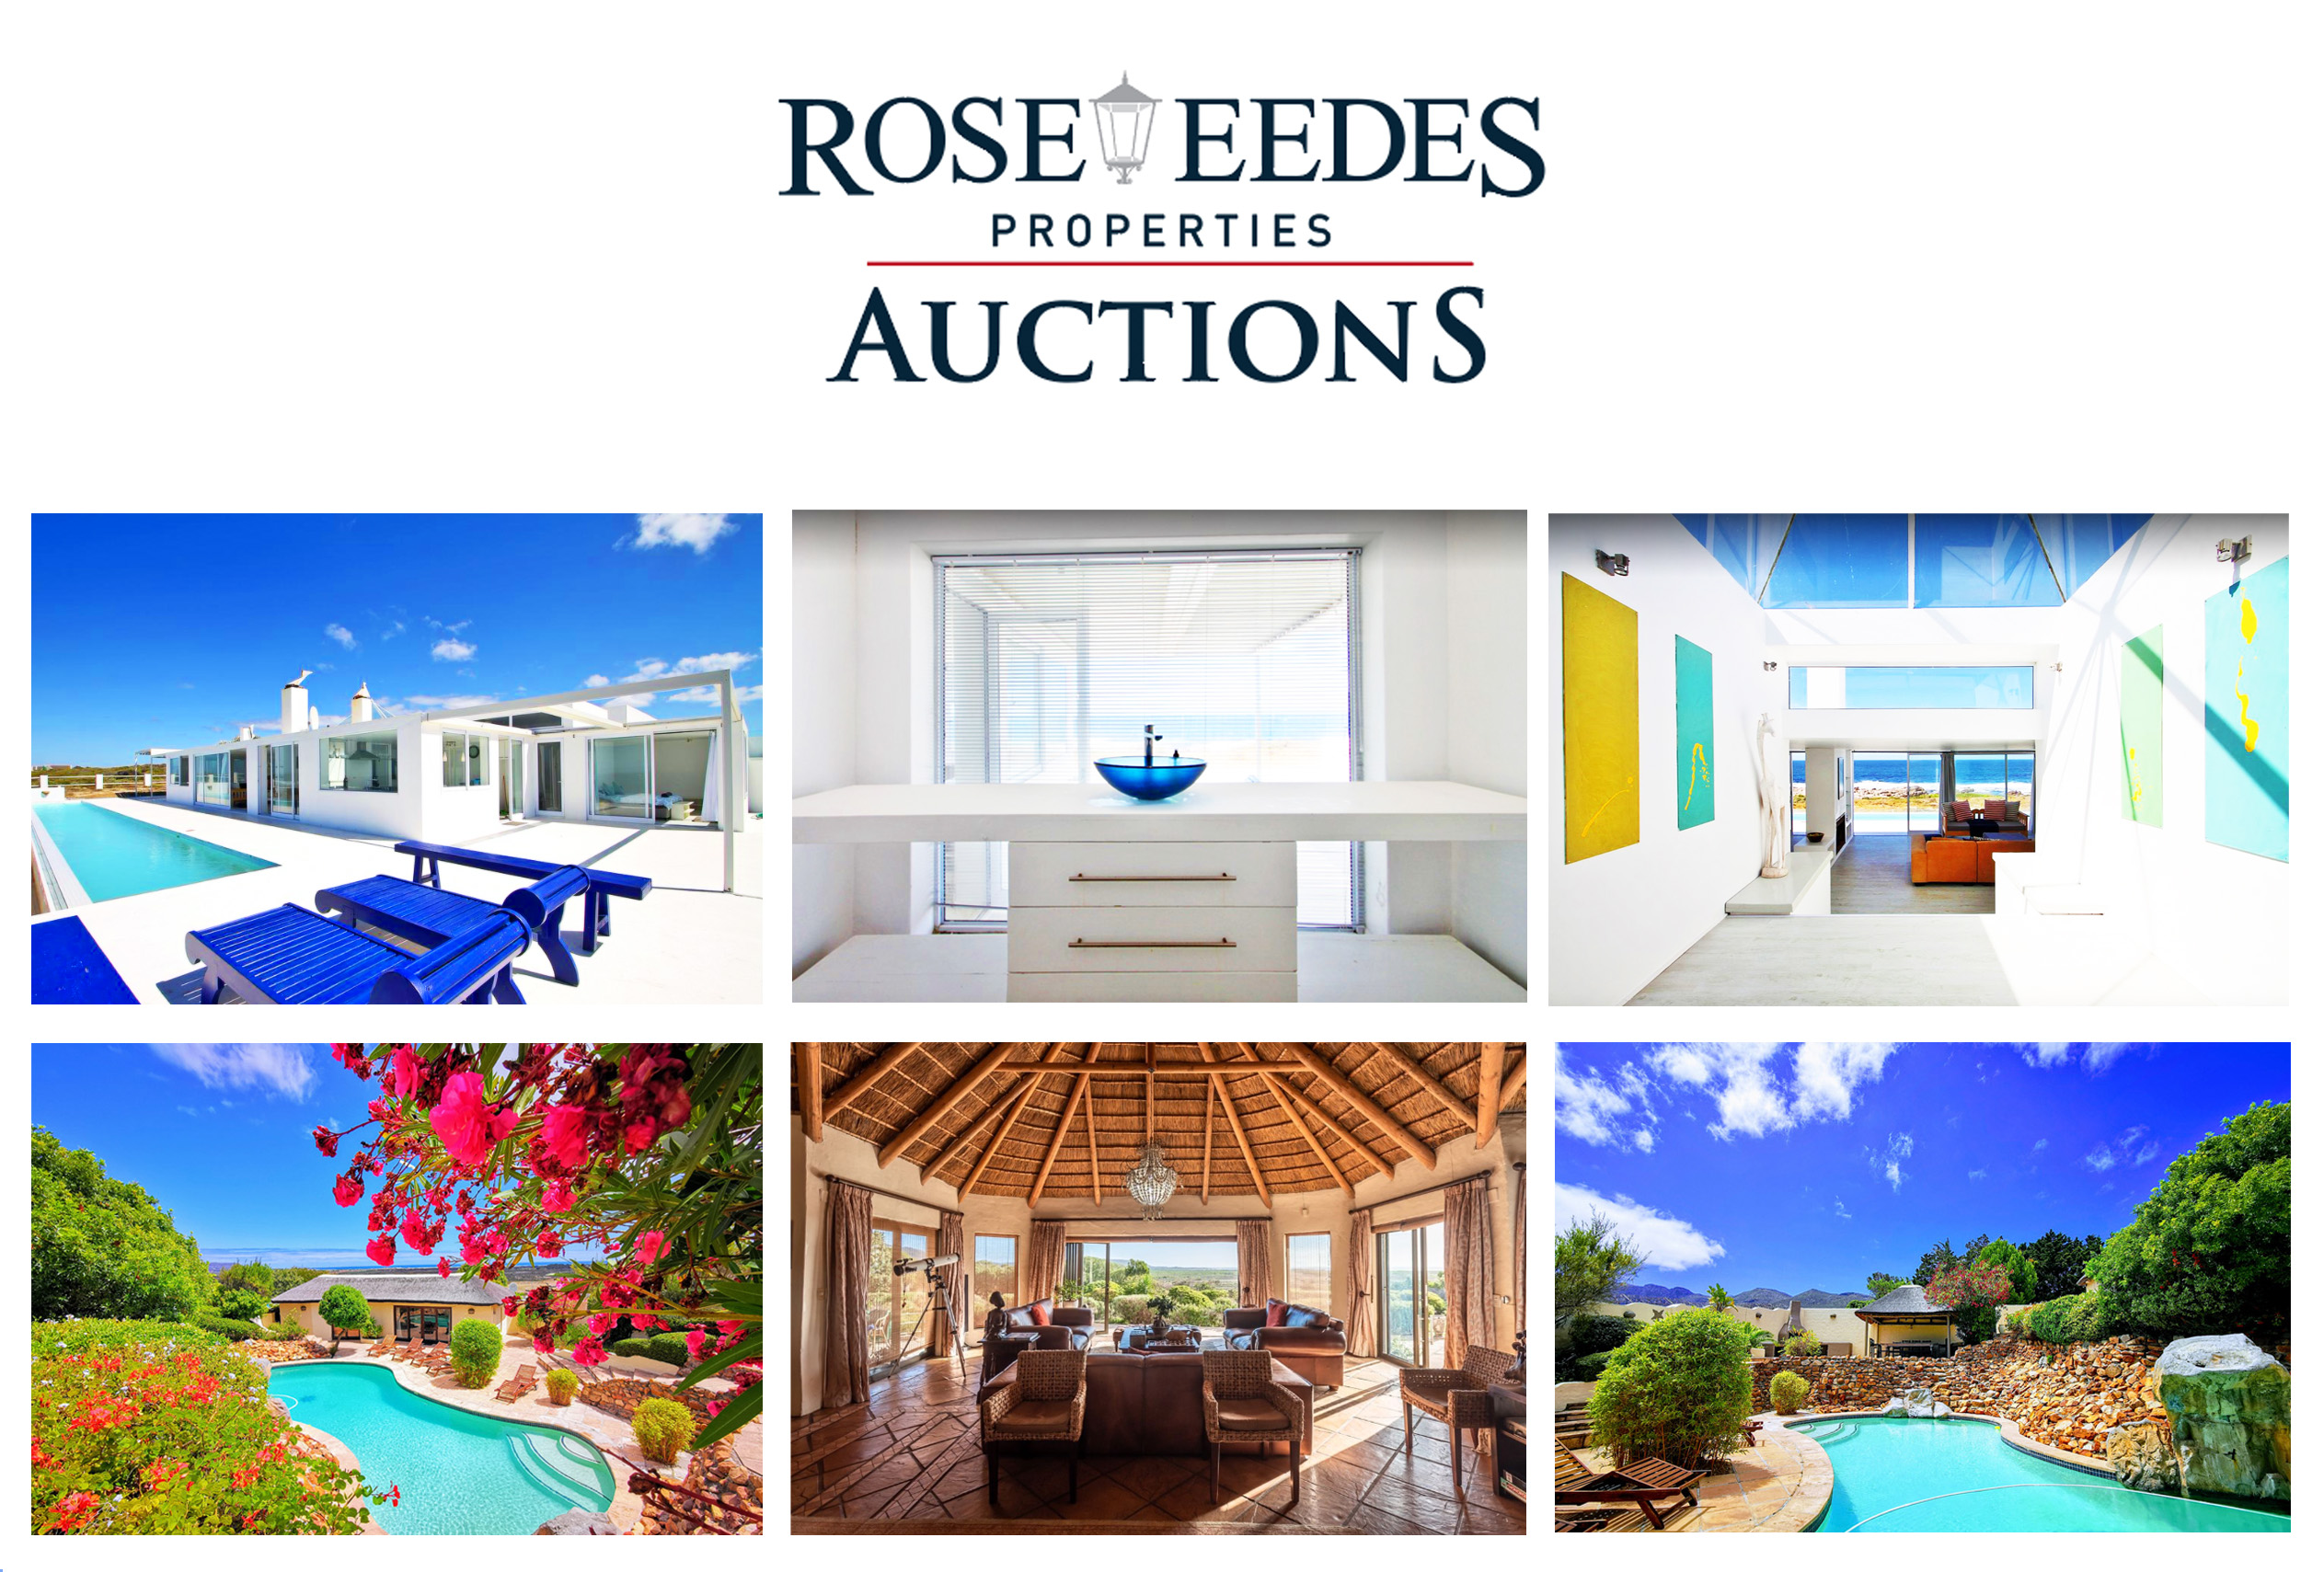 DATE: WEDNESDAY 29 JULY
TIME: 14:00
AT WILD ROSE COUNTRY LODGE

.   .   .   .

We invite you to join us at our online auction.
Please note all prices indicated are reserve prices.
All offers will be reviewed.

.   .   .   .